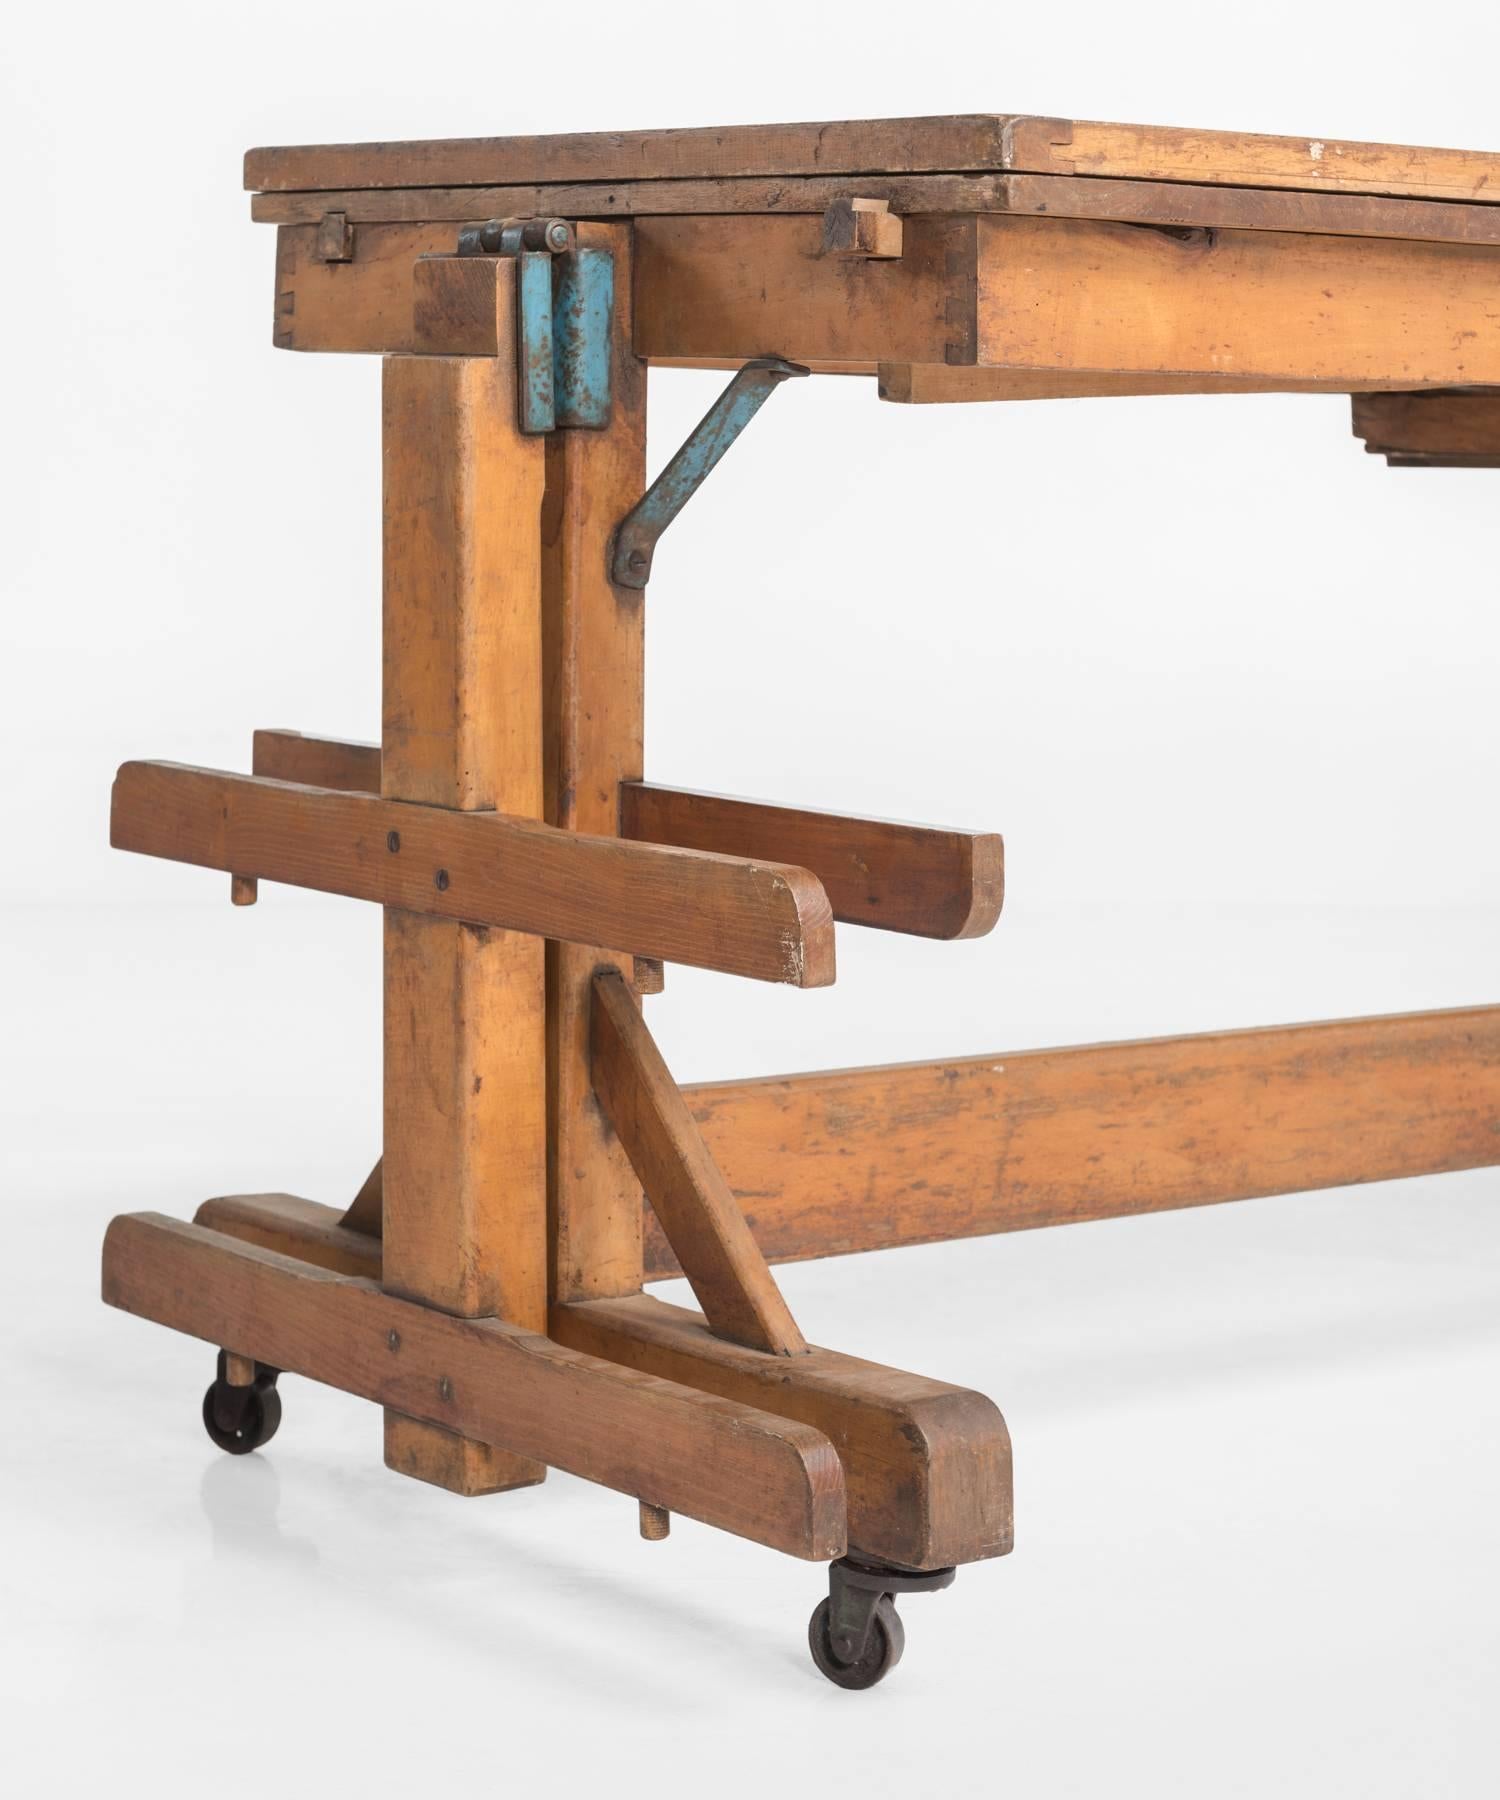 French Metamorphic Bakers Table, circa 1900